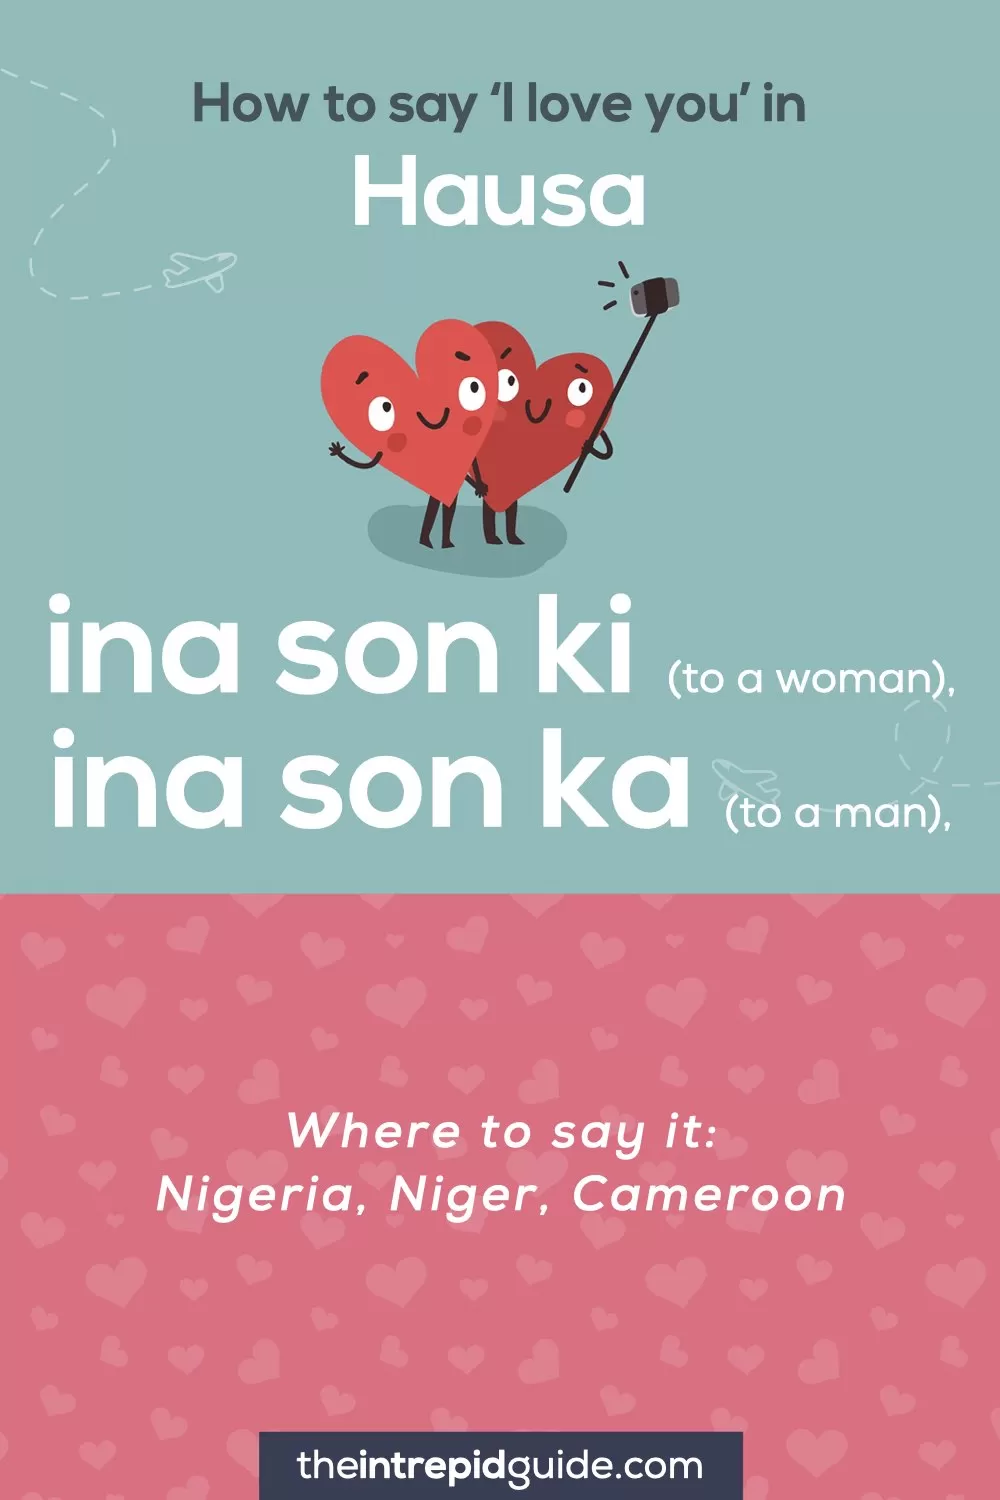 How to say I love you in different languages - Hausa - ina son ki